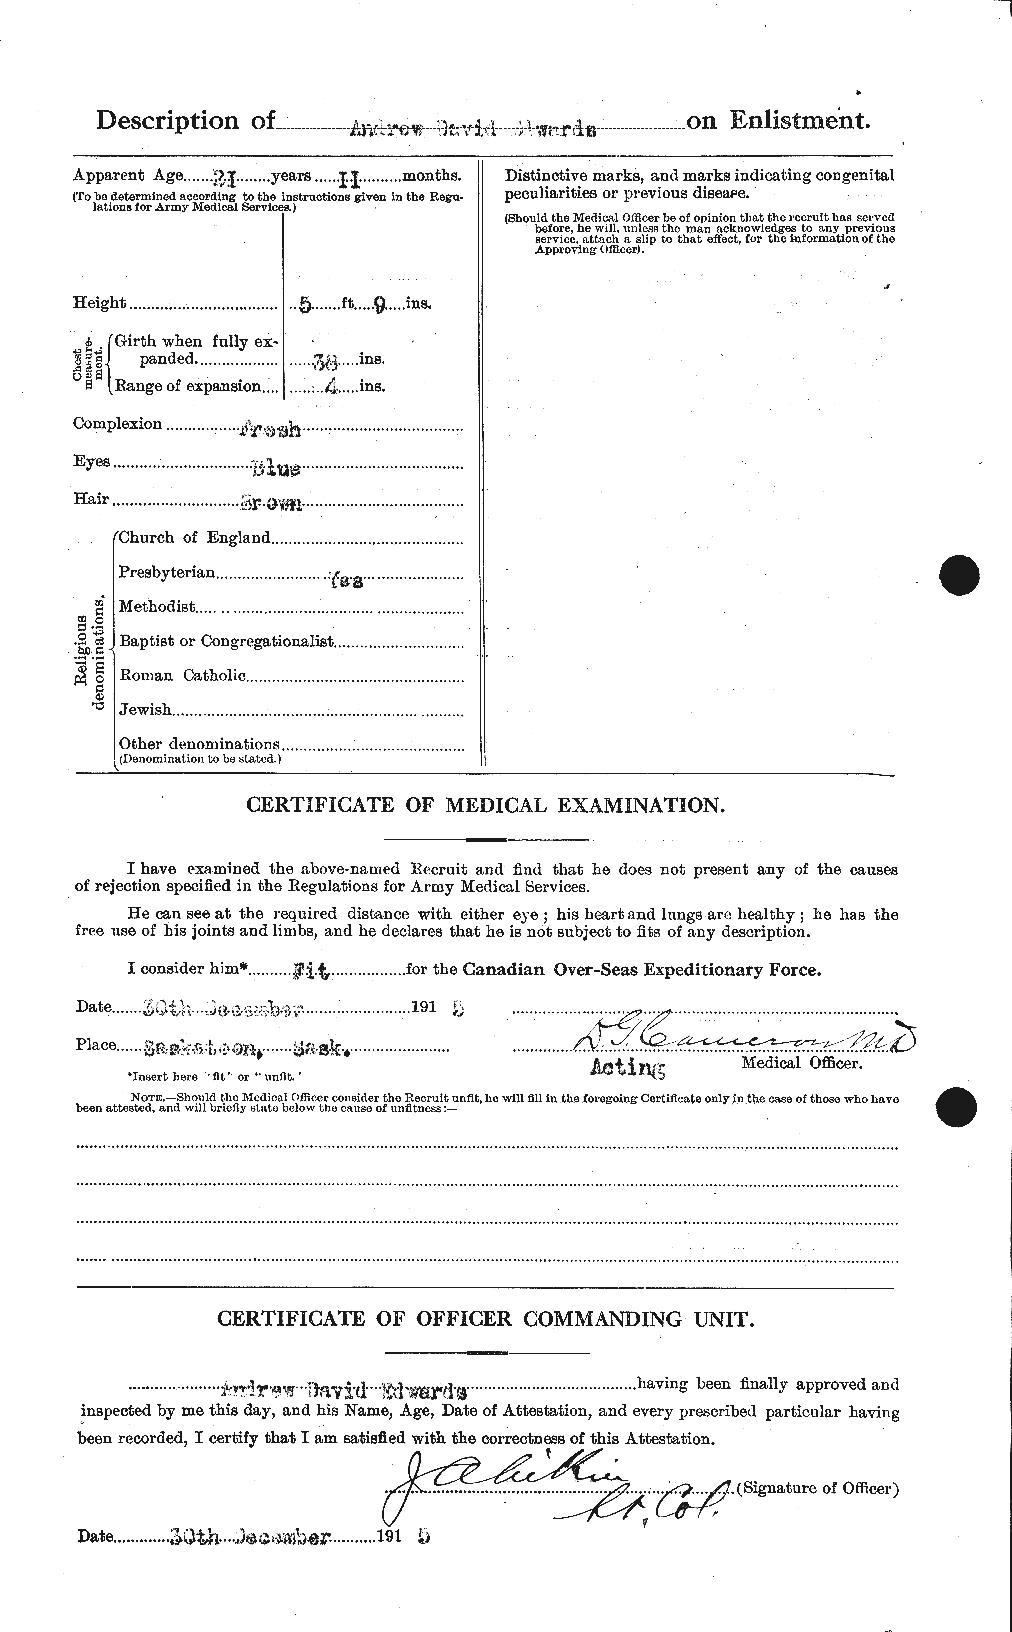 Personnel Records of the First World War - CEF 313117b